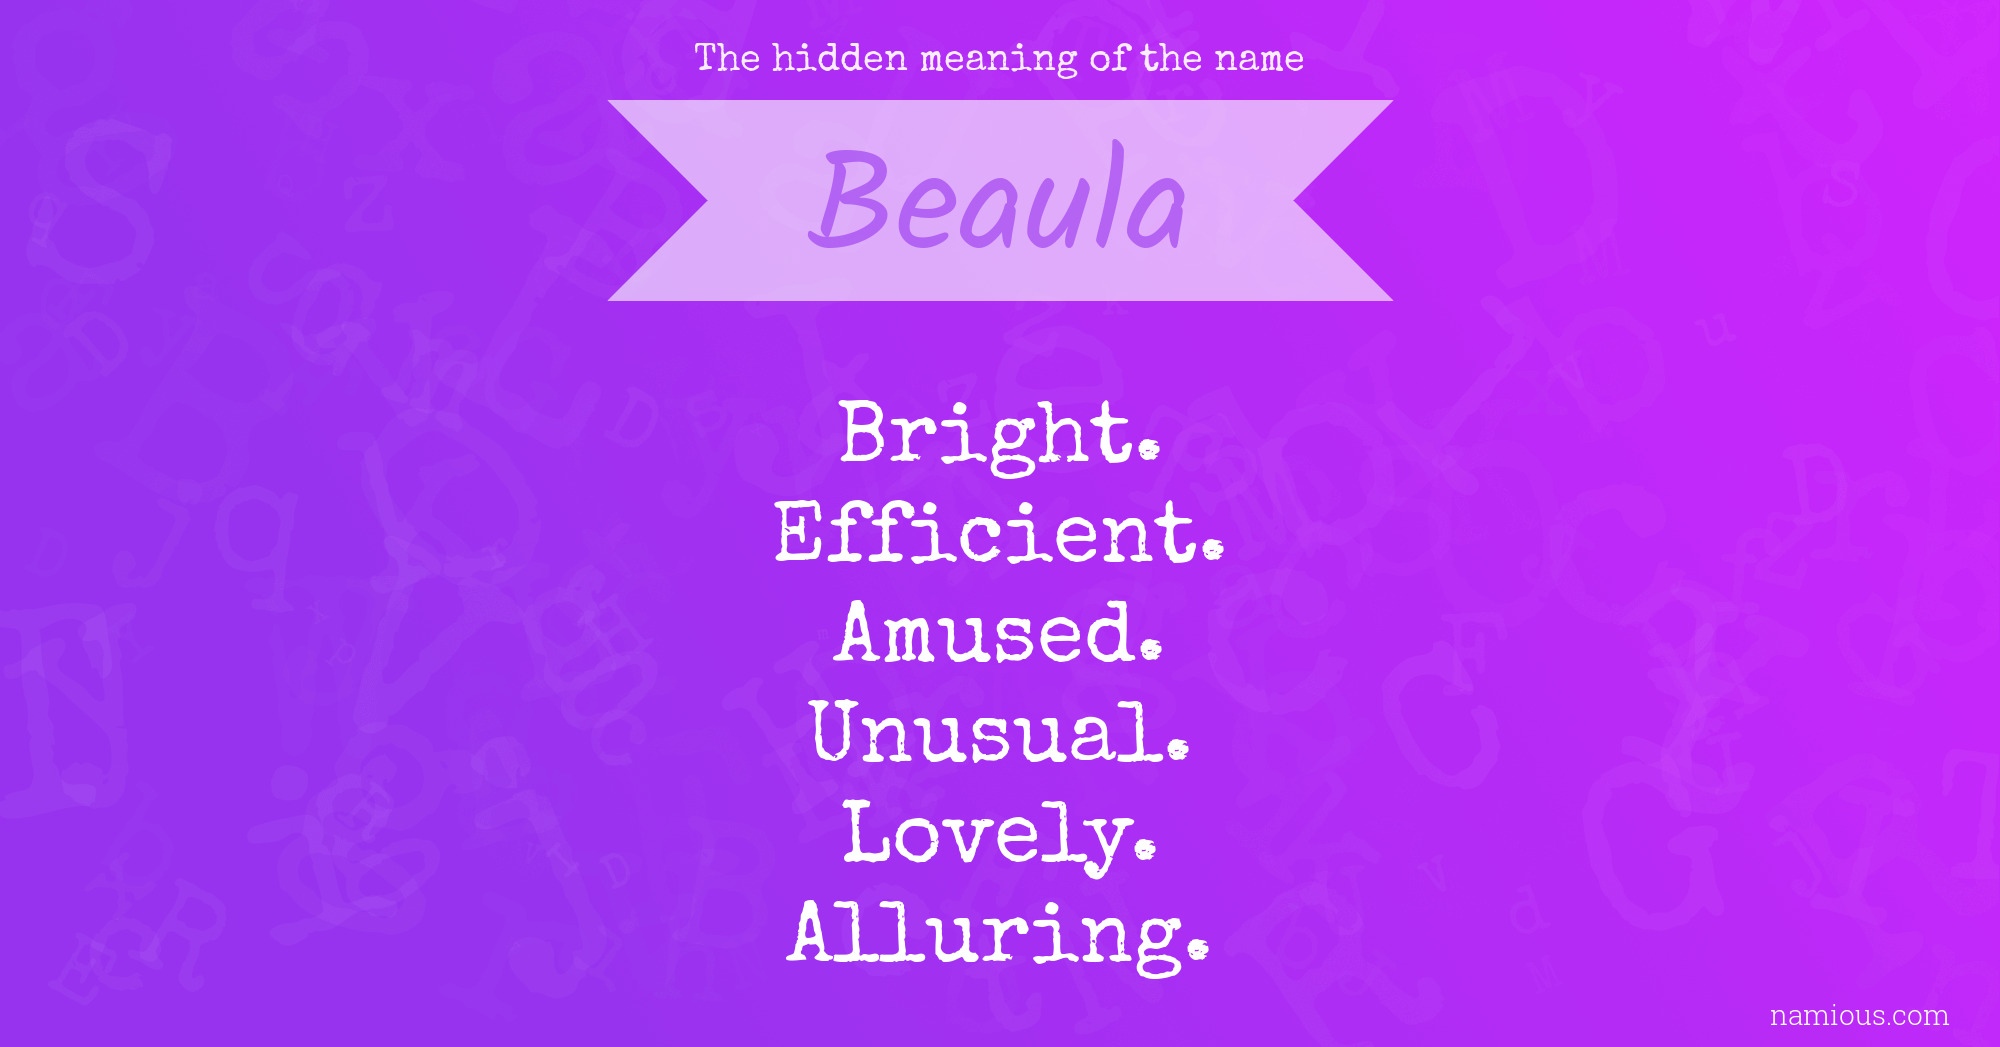 The hidden meaning of the name Beaula